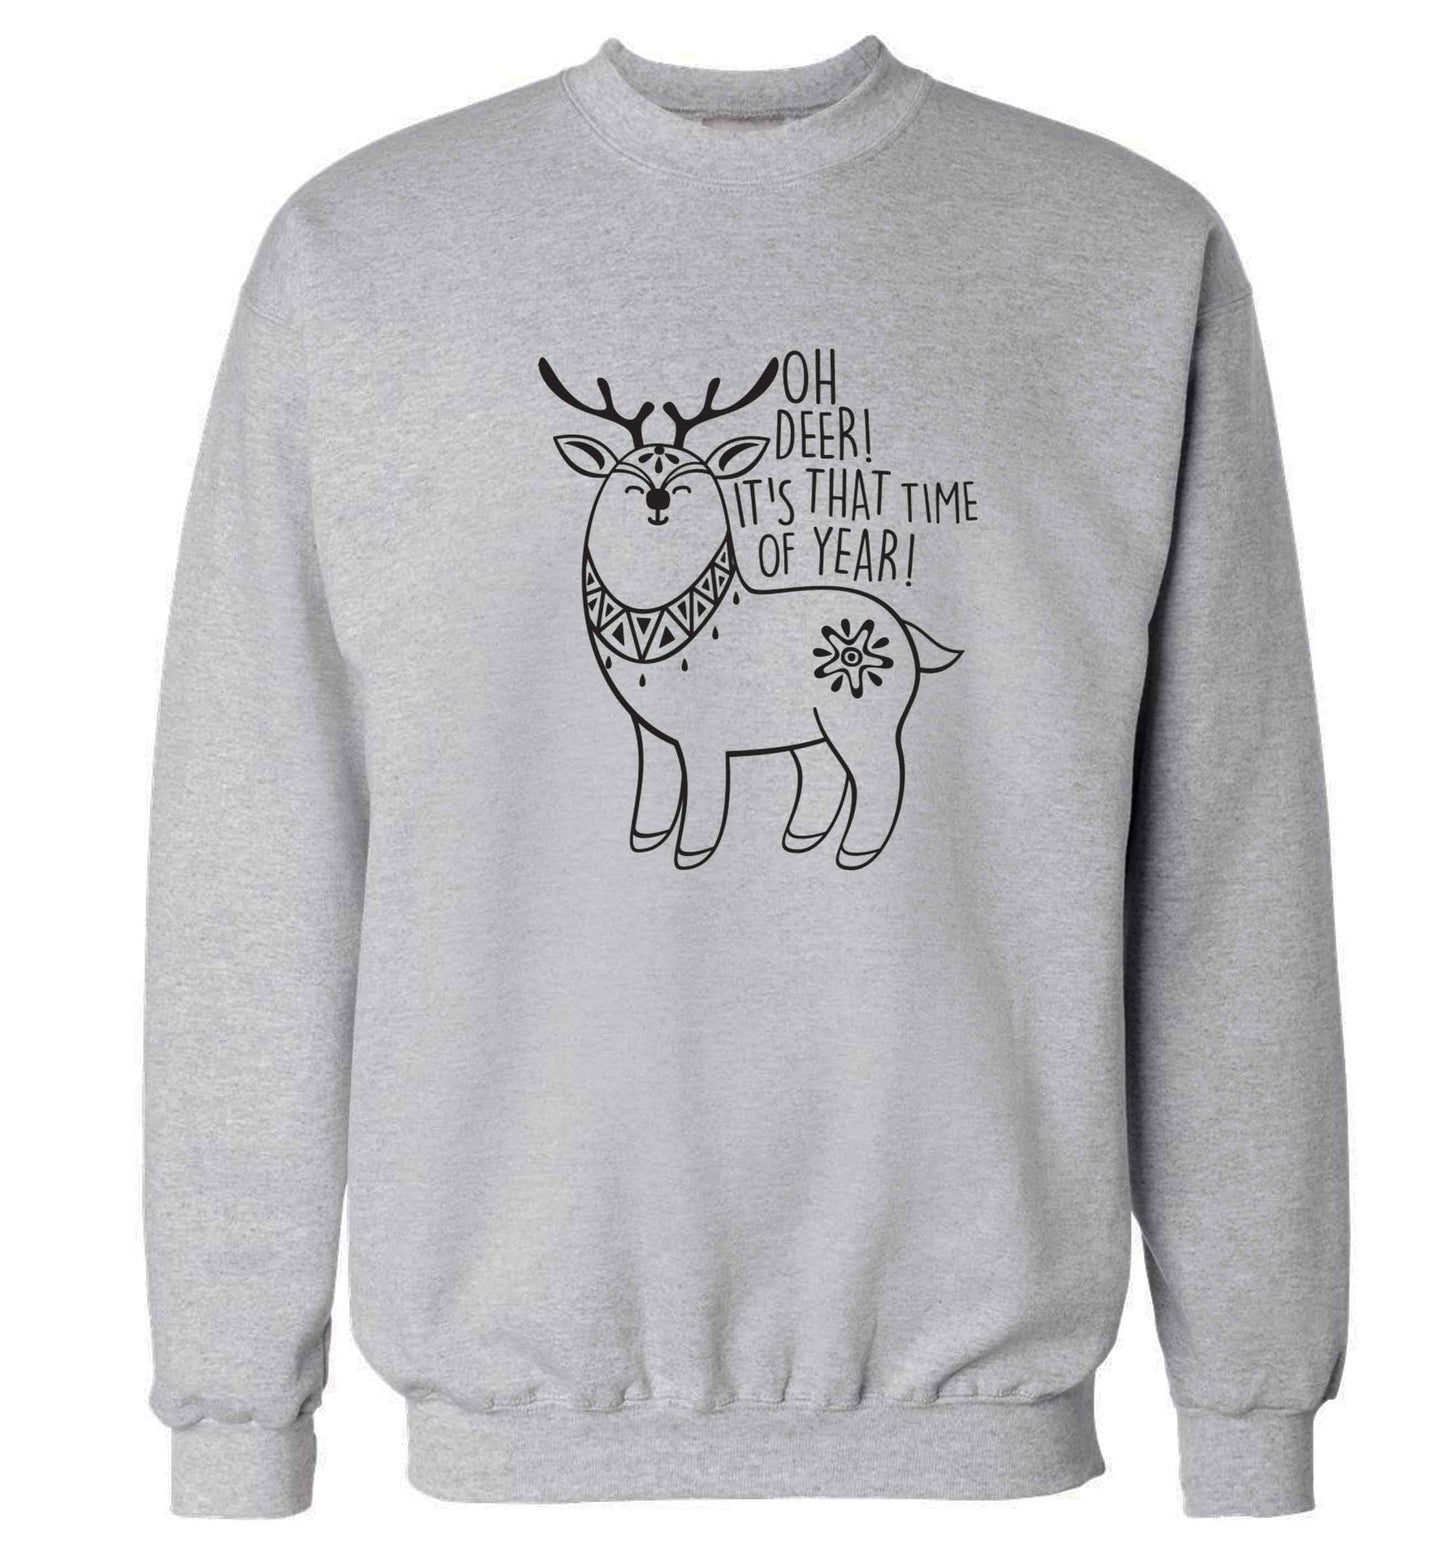 Oh dear it's that time of year Adult's unisex grey Sweater 2XL